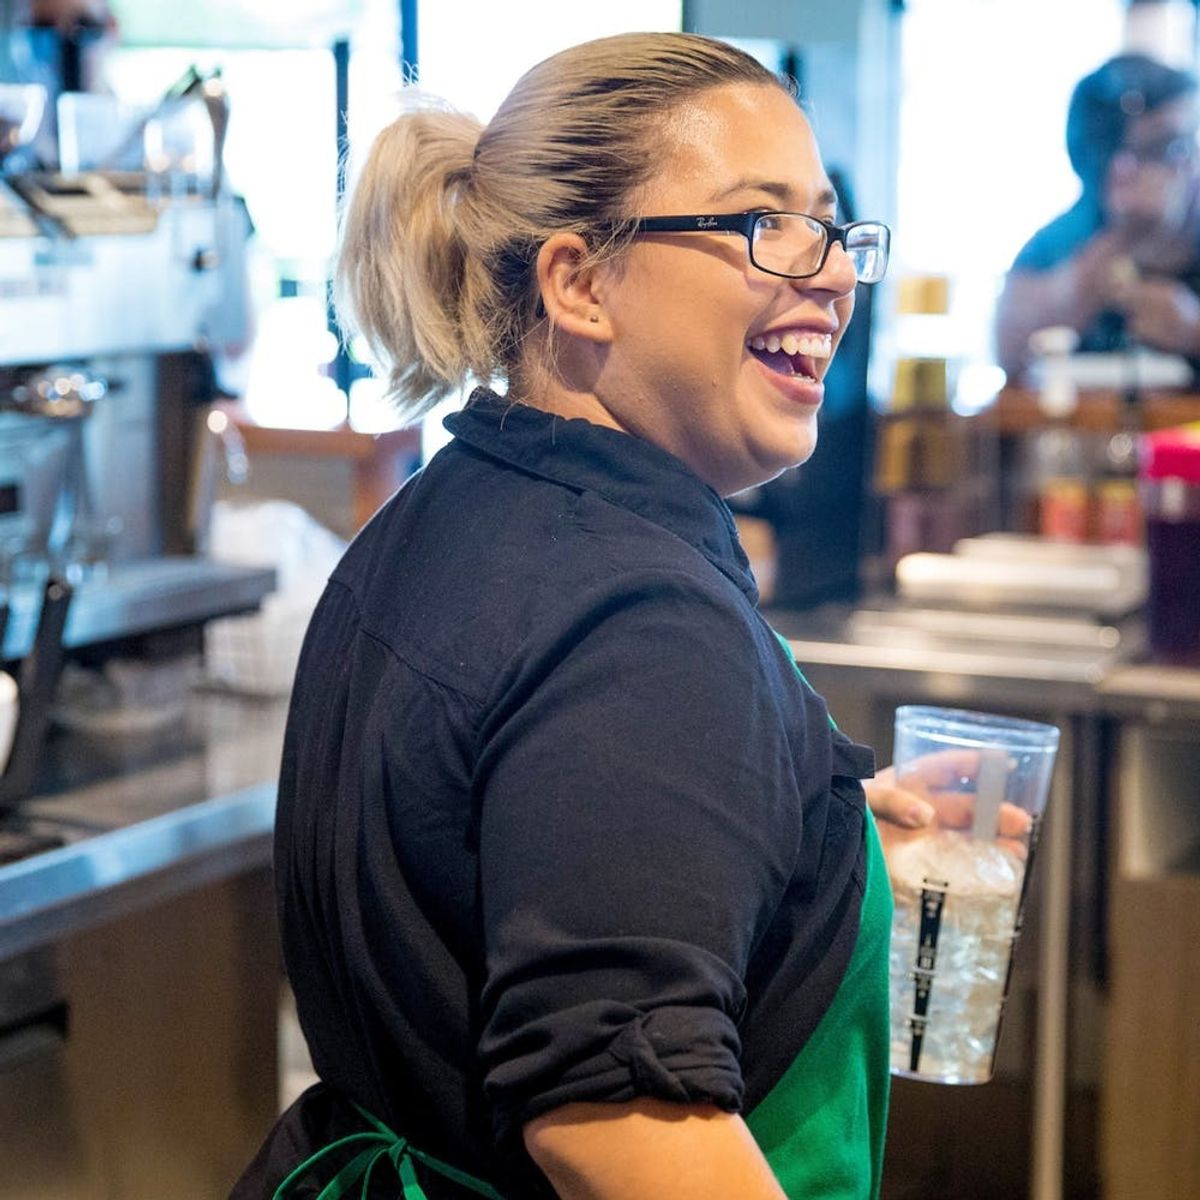 You’ll Cheer for Starbucks’ New All-Inclusive Parental-Leave Policy